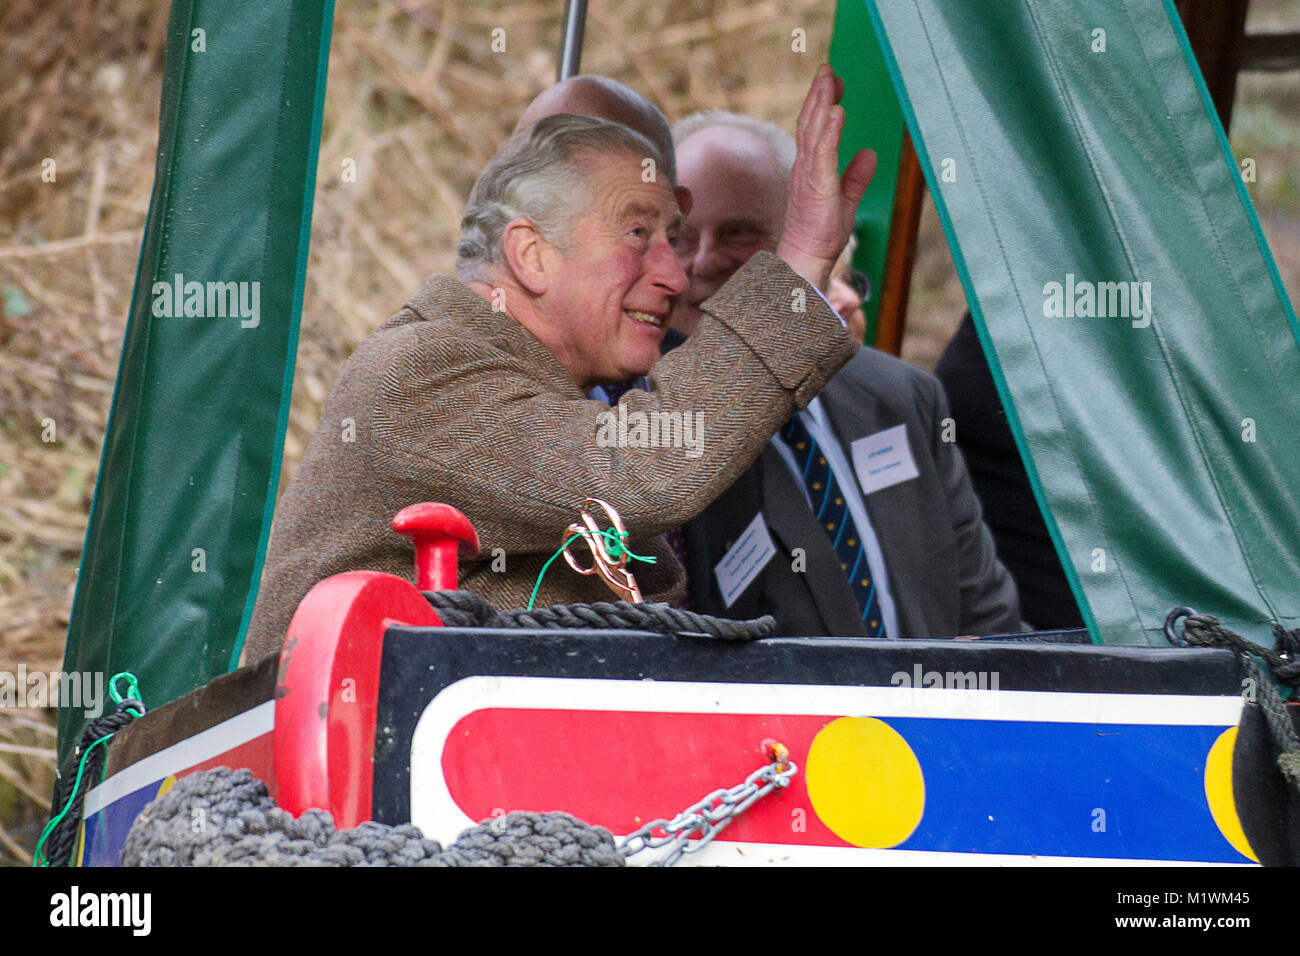 Stroud, Gloucestershire, UK. 2nd February, 2018. HRH The Prince of Wales waves to spectators at Wallbridge Lock, Stroud, UK. Prince Charles visited to officially open the newly restored Wallbridge Lower Lock, part of the Cotswold Canals Project. Picture: Carl Hewlett/Alamy Live News Stock Photo